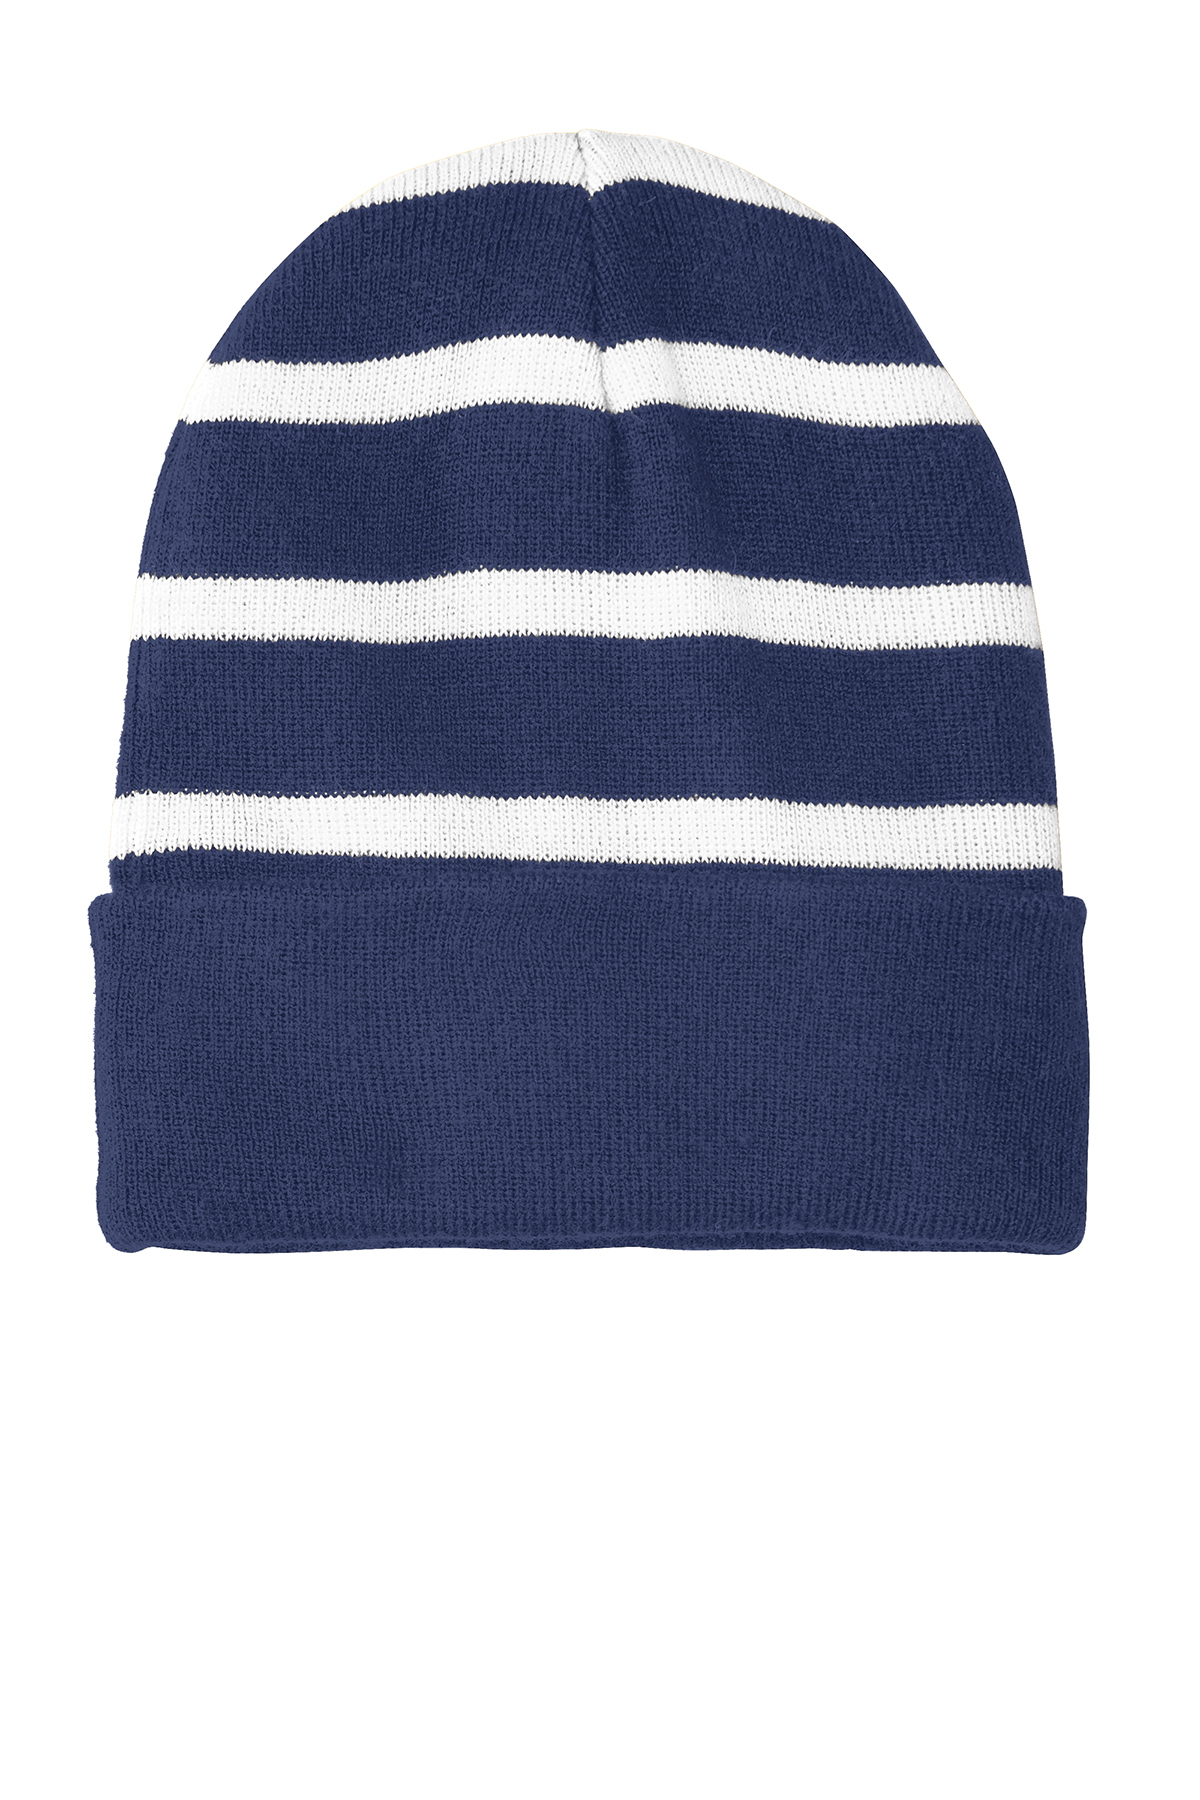 Sport-Tek Striped Beanie with Solid Band | Product | Sport-Tek